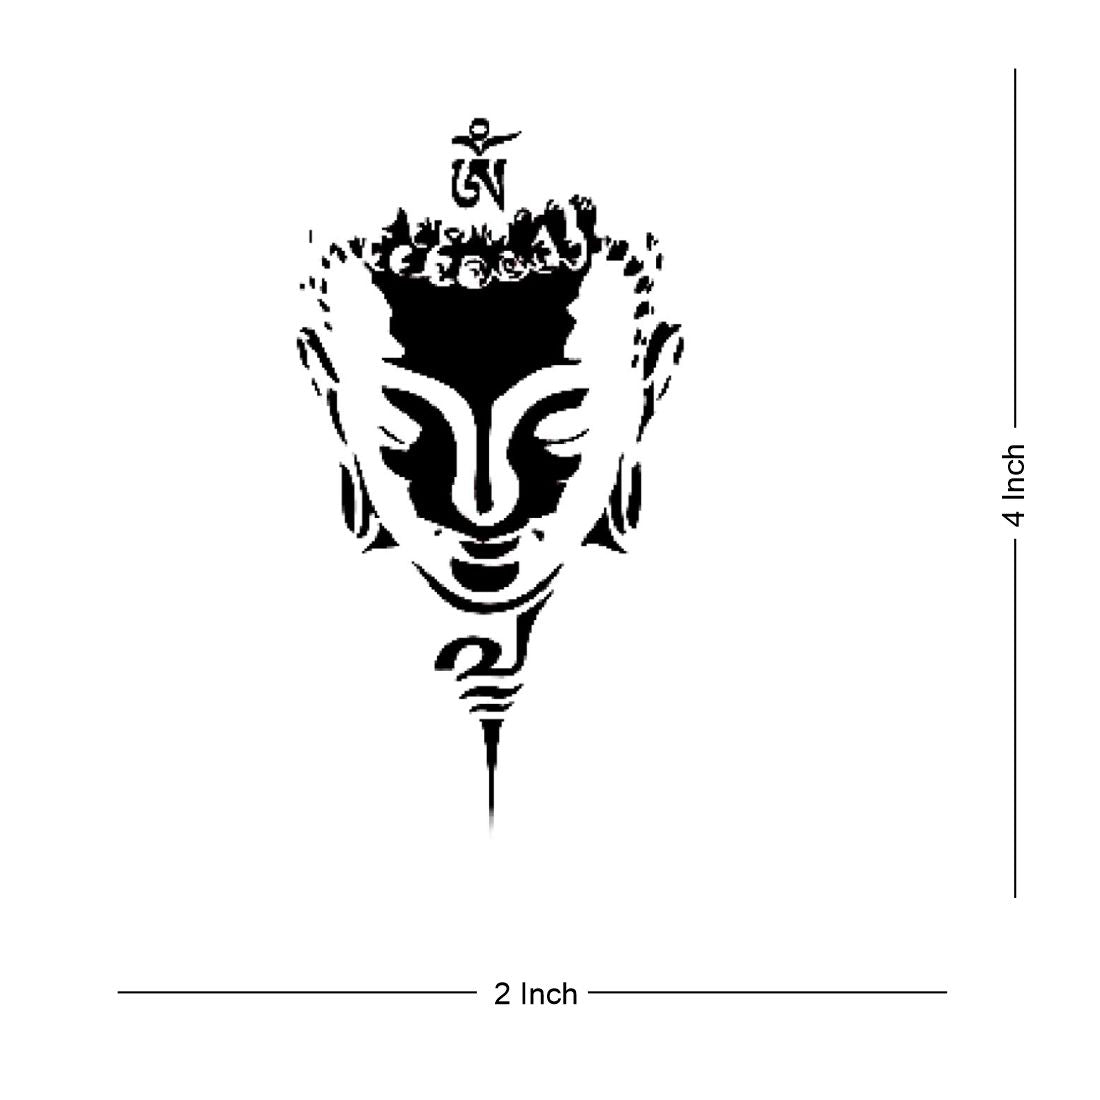 3D (The Canvas Arts) Temporary Tattoo Waterproof For Men Women Arm Hand  (Lord Buddha Tattoo) Size 21X15 cm TH-673 : Amazon.in: Beauty